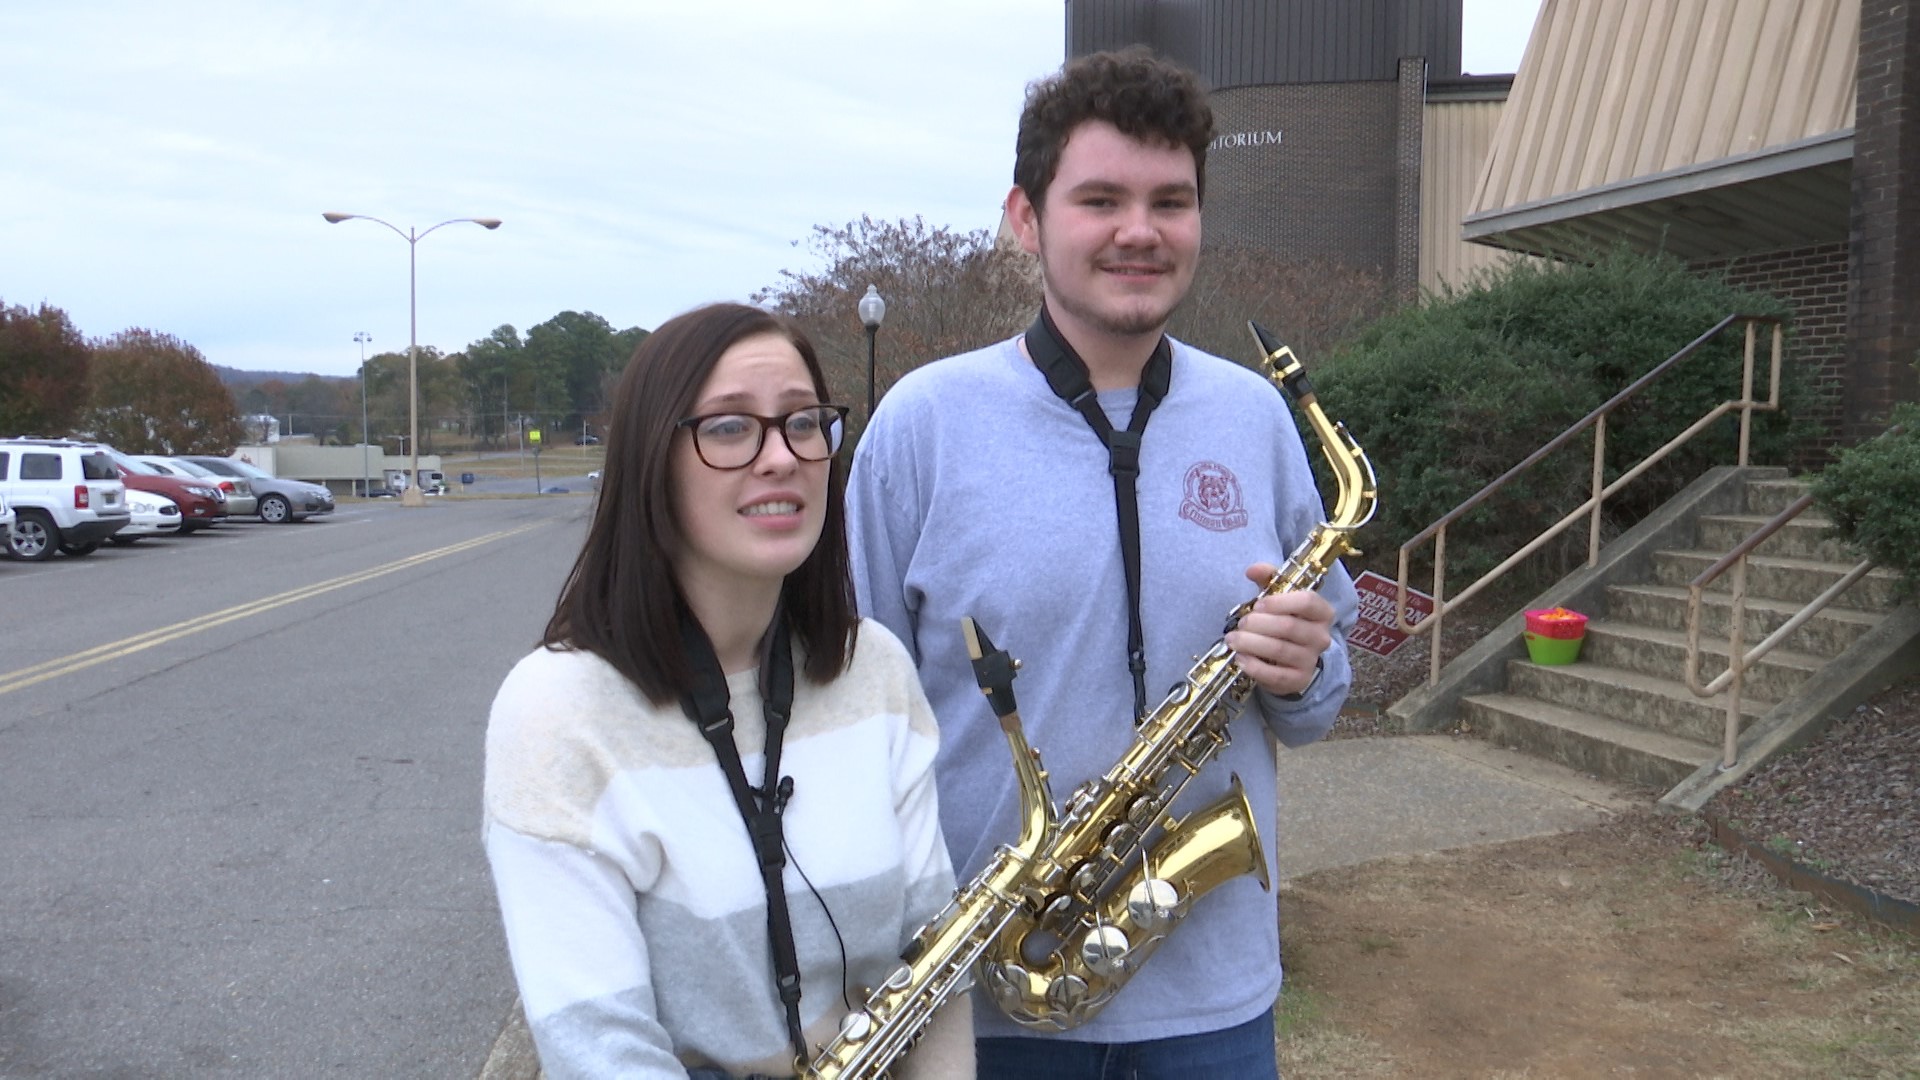 The Guntersville High School band had their last practice today before heading to Philadelphia to march in the 2019 Thanksgiving Day Parade. Guntersville High School's Crimson Guard was invited to play a fanfare of "Oh Come, All Ye Faithful" at the parade.